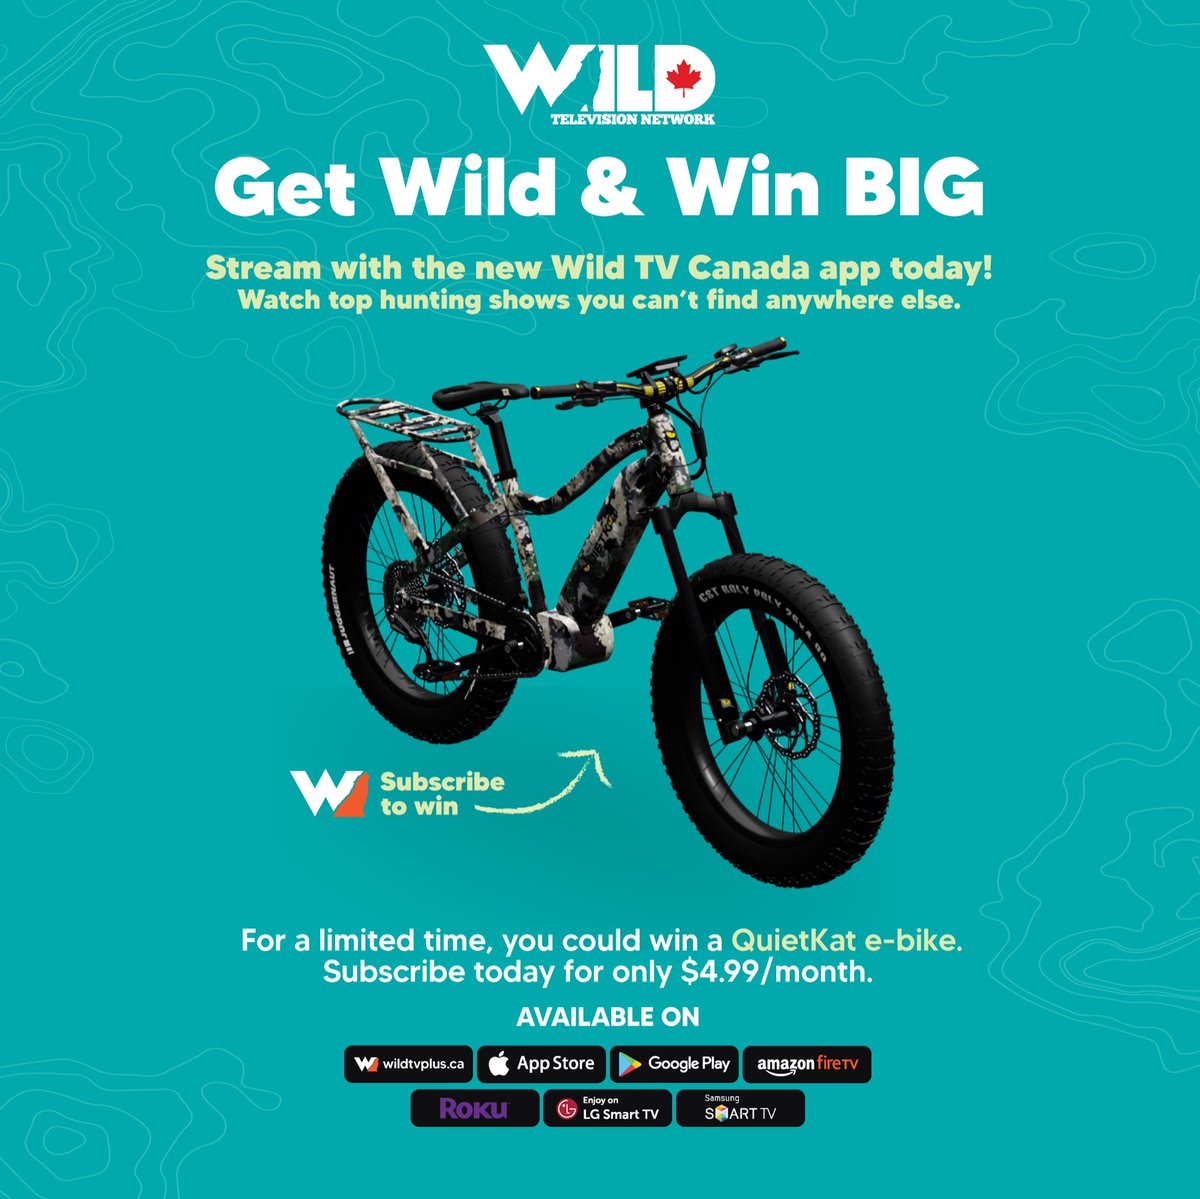 Get the app today for a chance to win a Quietcat #ebike an unbelievable scouting tool !!